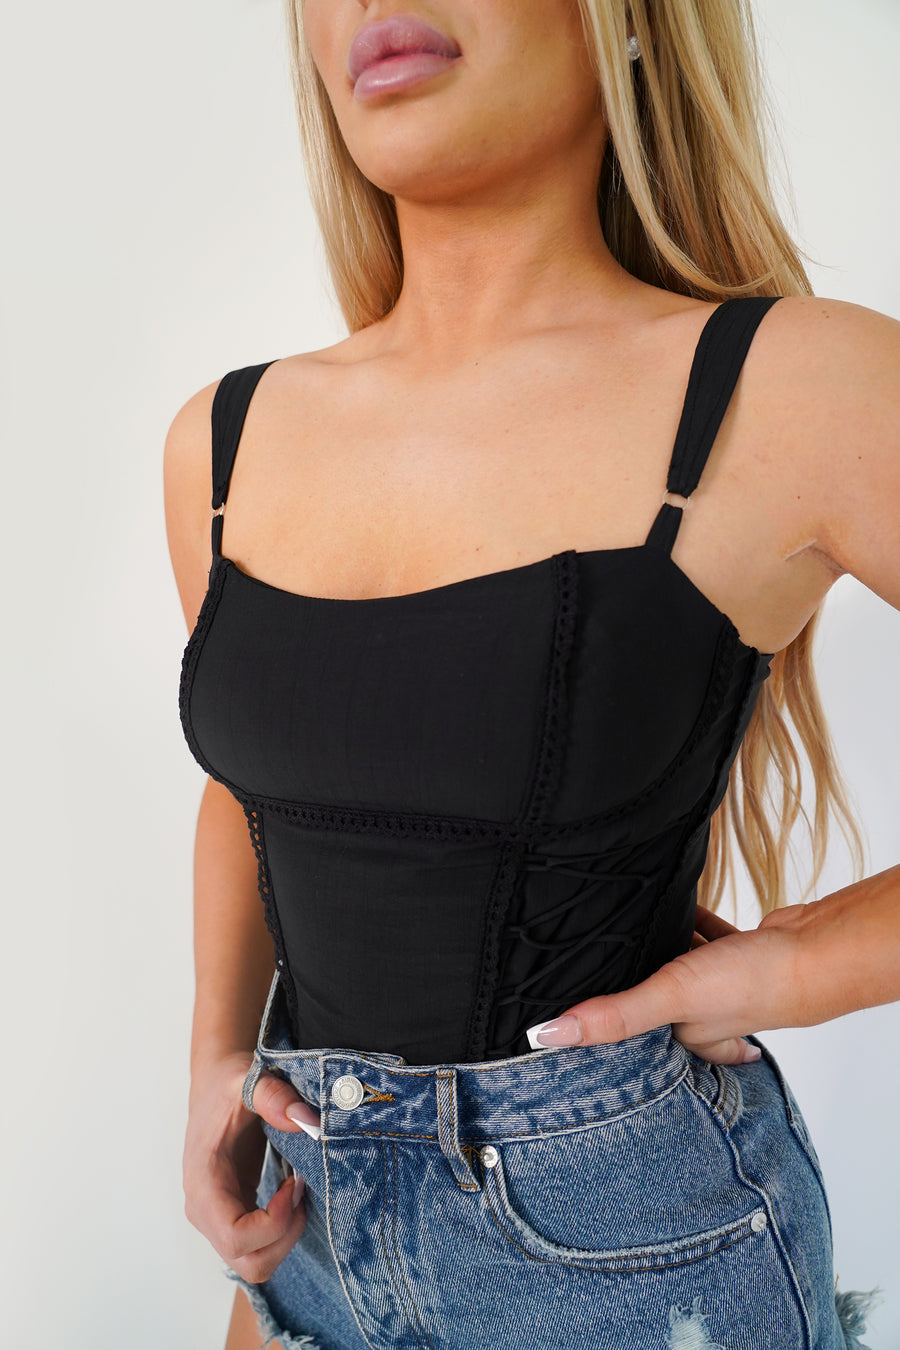 Laced up Bustier Top